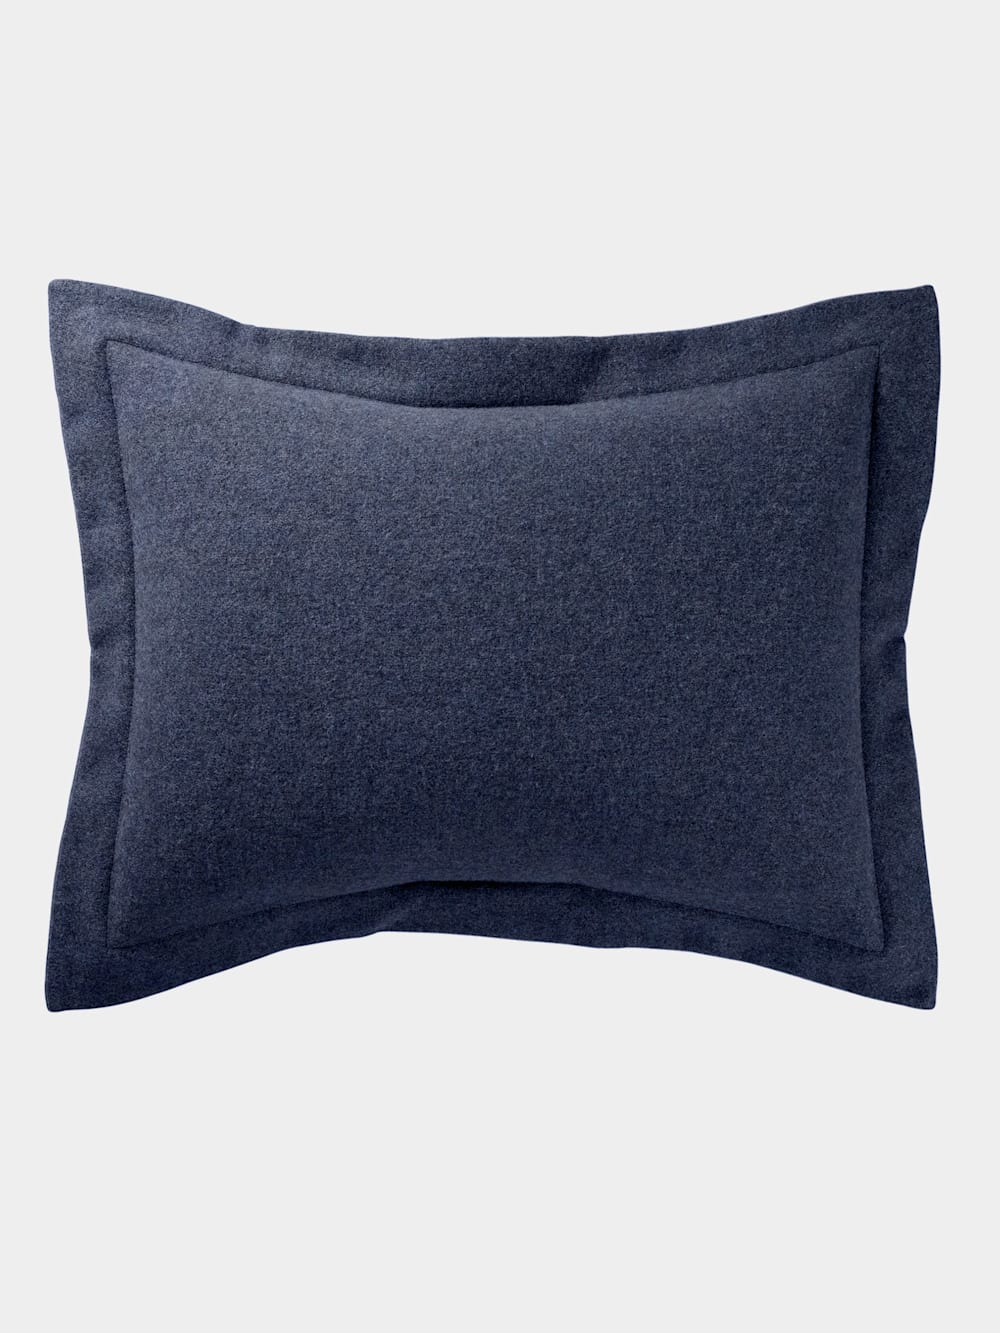 ECO-WISE WOOL EASY-CARE SHAM IN NAVY HEATHER image number 1